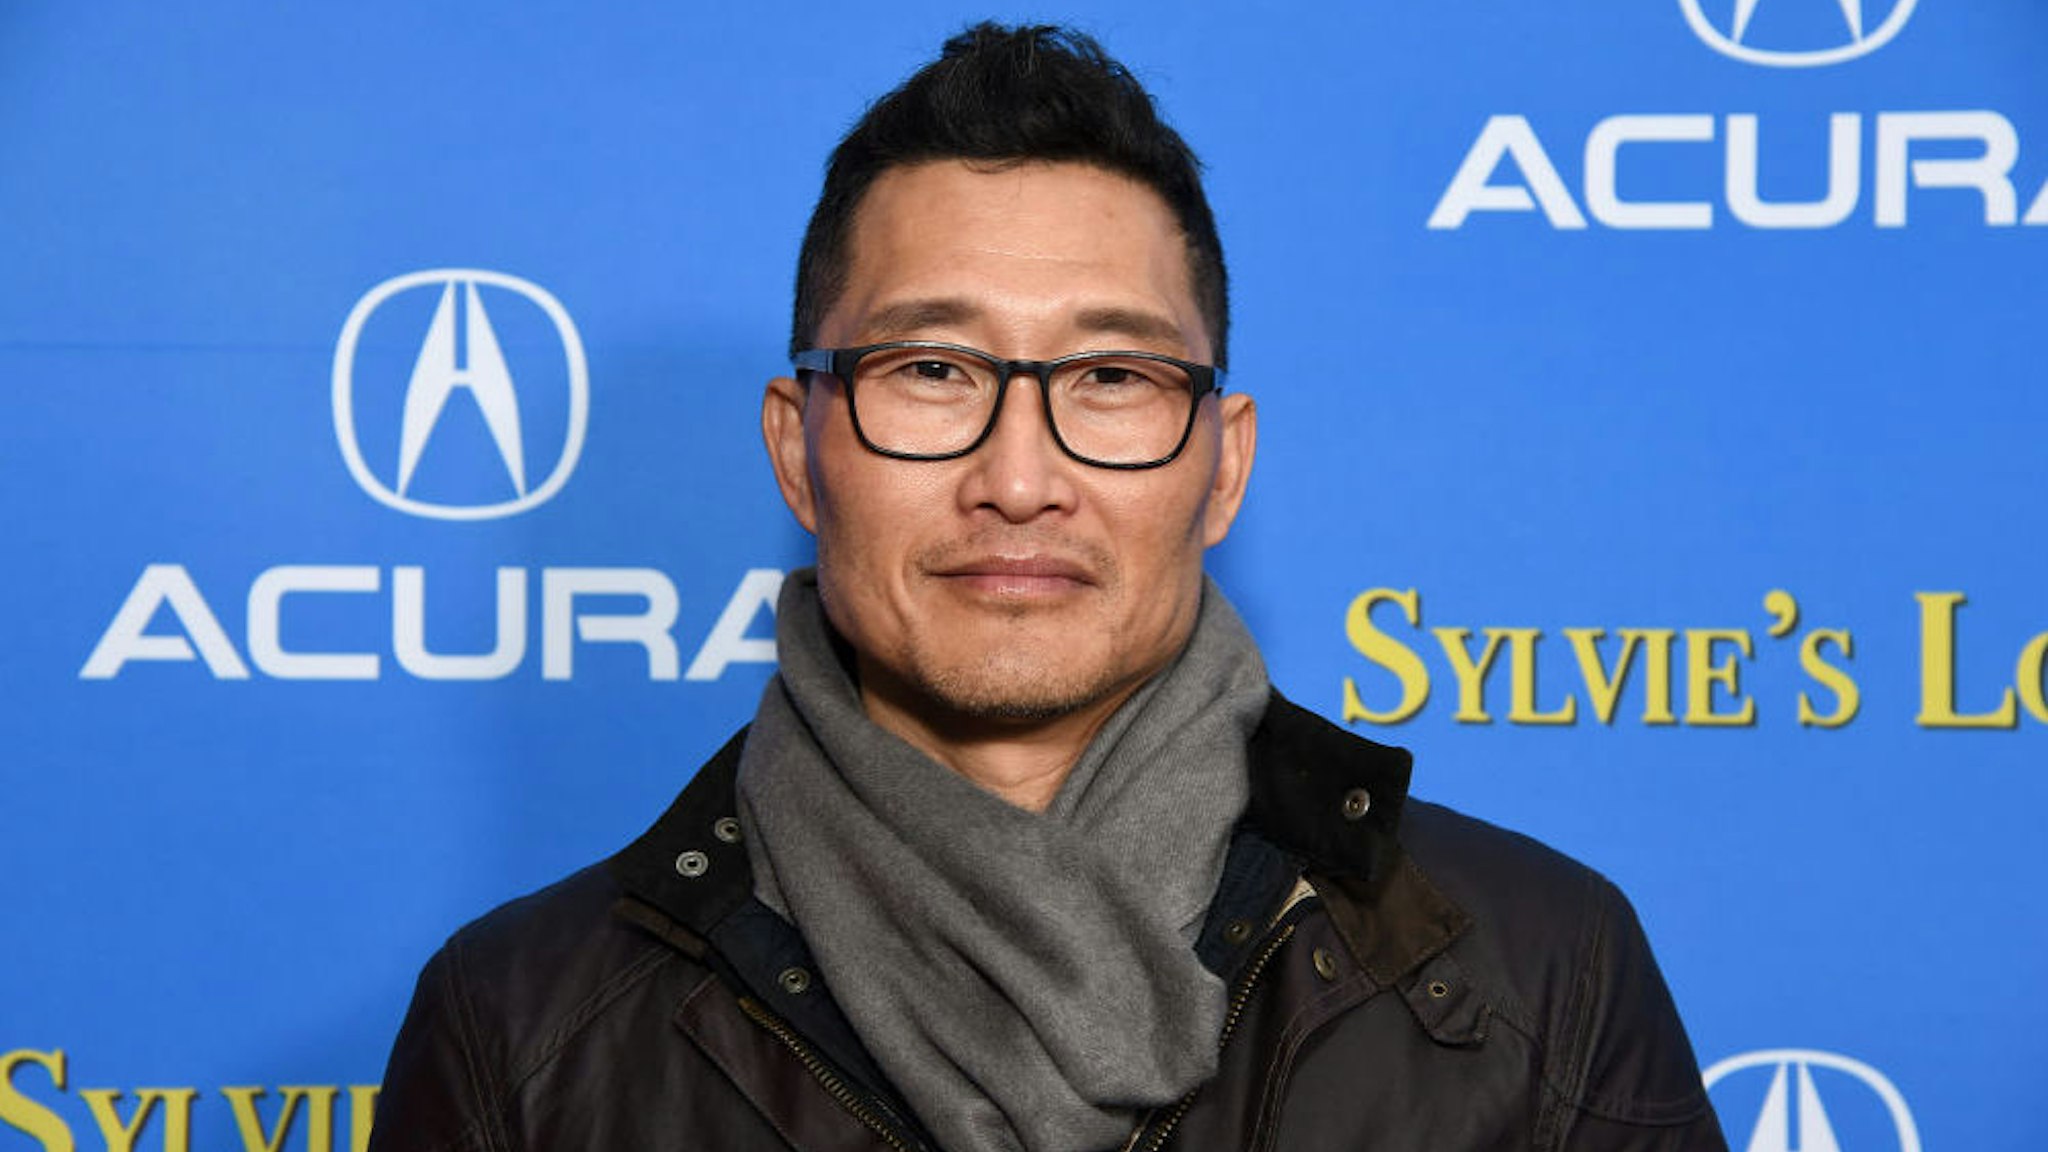 Daniel Dae Kim attends the after party for "Sylvie's Love" at Acura Festival Village on January 27, 2020 in Park City, Utah.